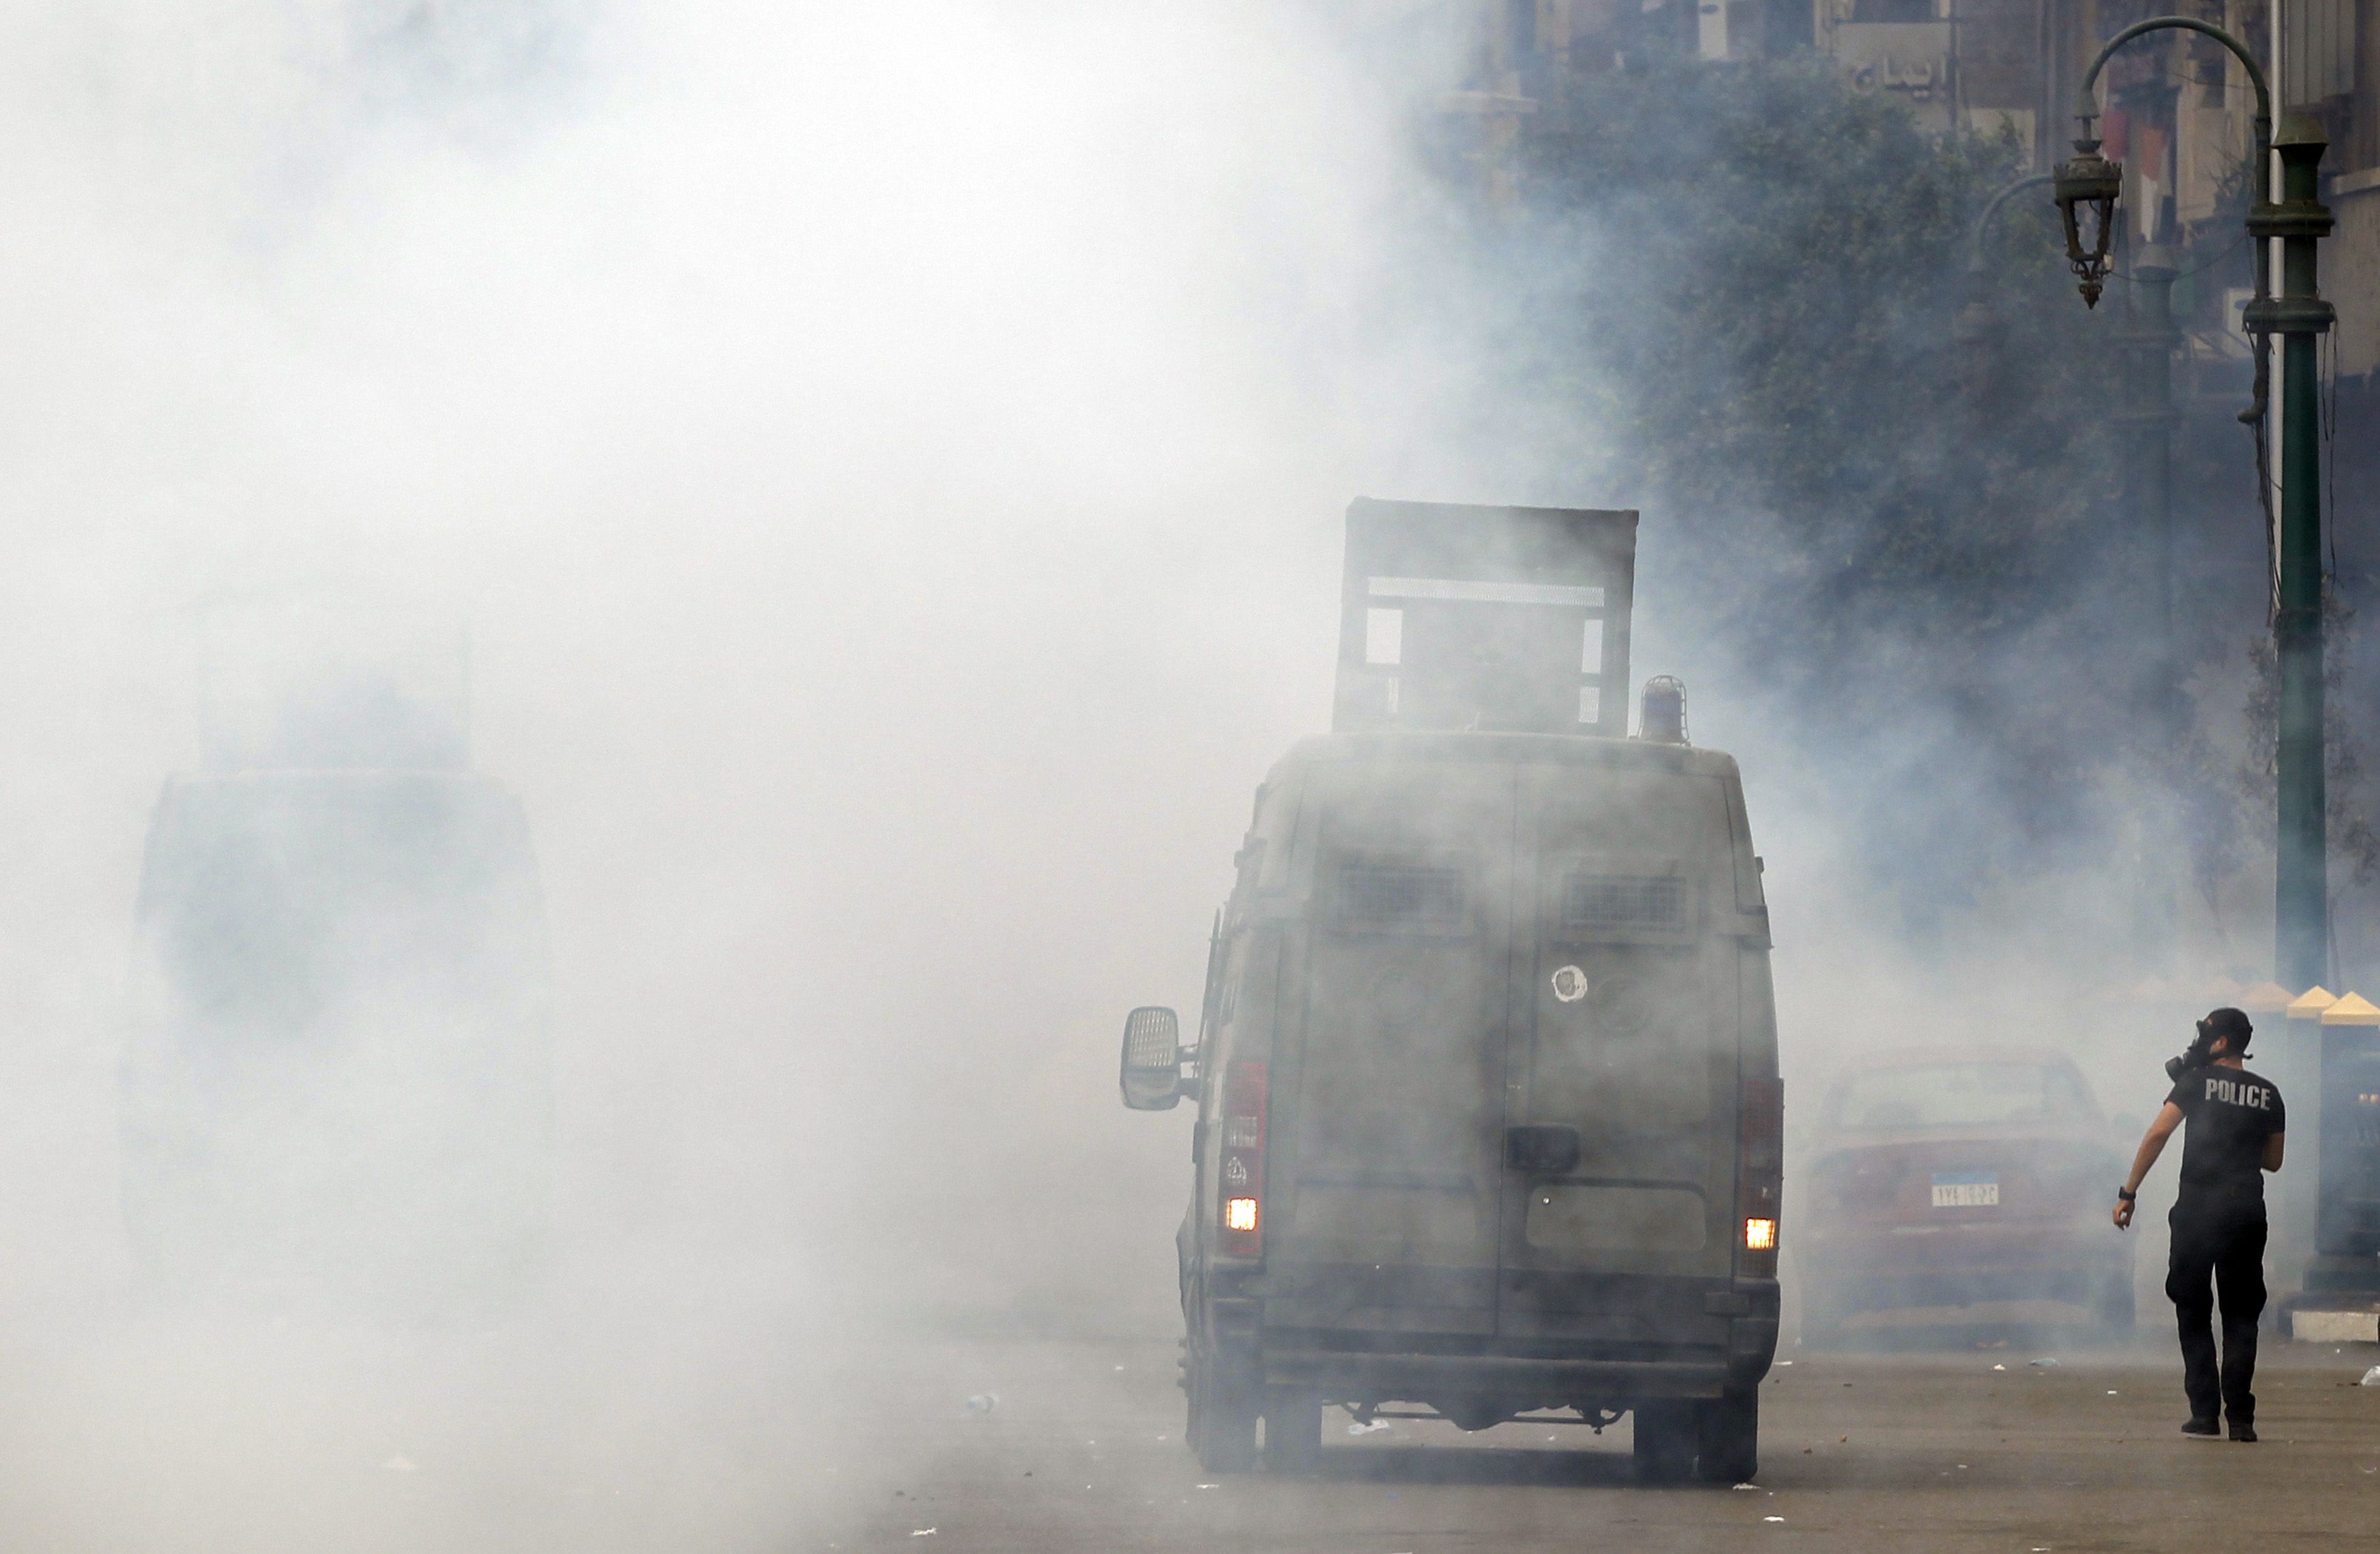 Egyptian police fire tear gas to end clashes in Cairo